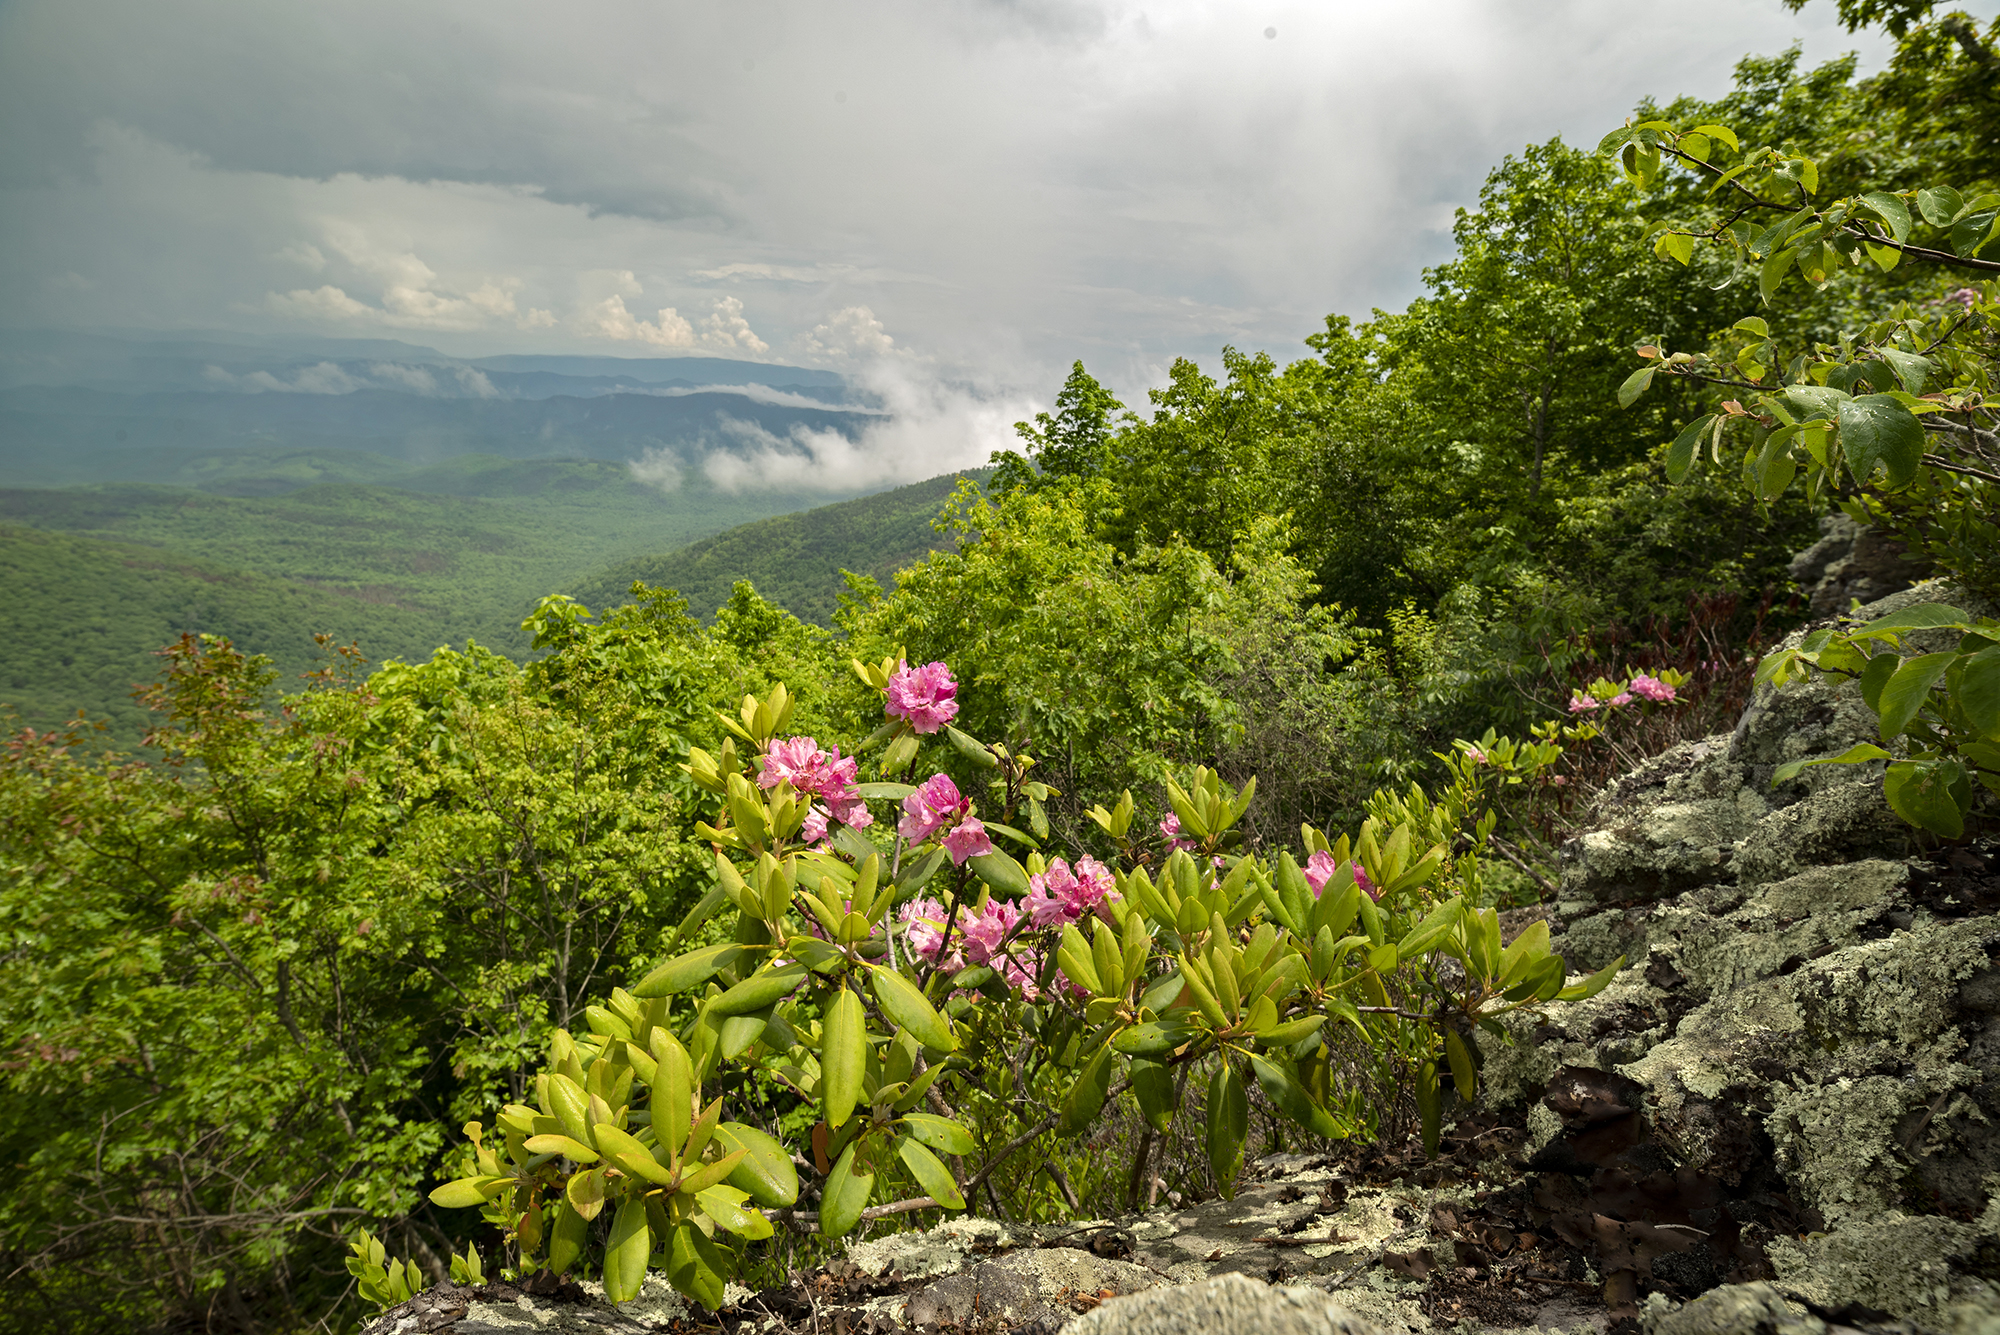 Vegetation of the Appalachians. A mountain slope at Warm Springs Mountain Preserve, Virginia. Rain clouds hover in the sky over Bear Loop Trail as rhododendron blooms in the foreground. 